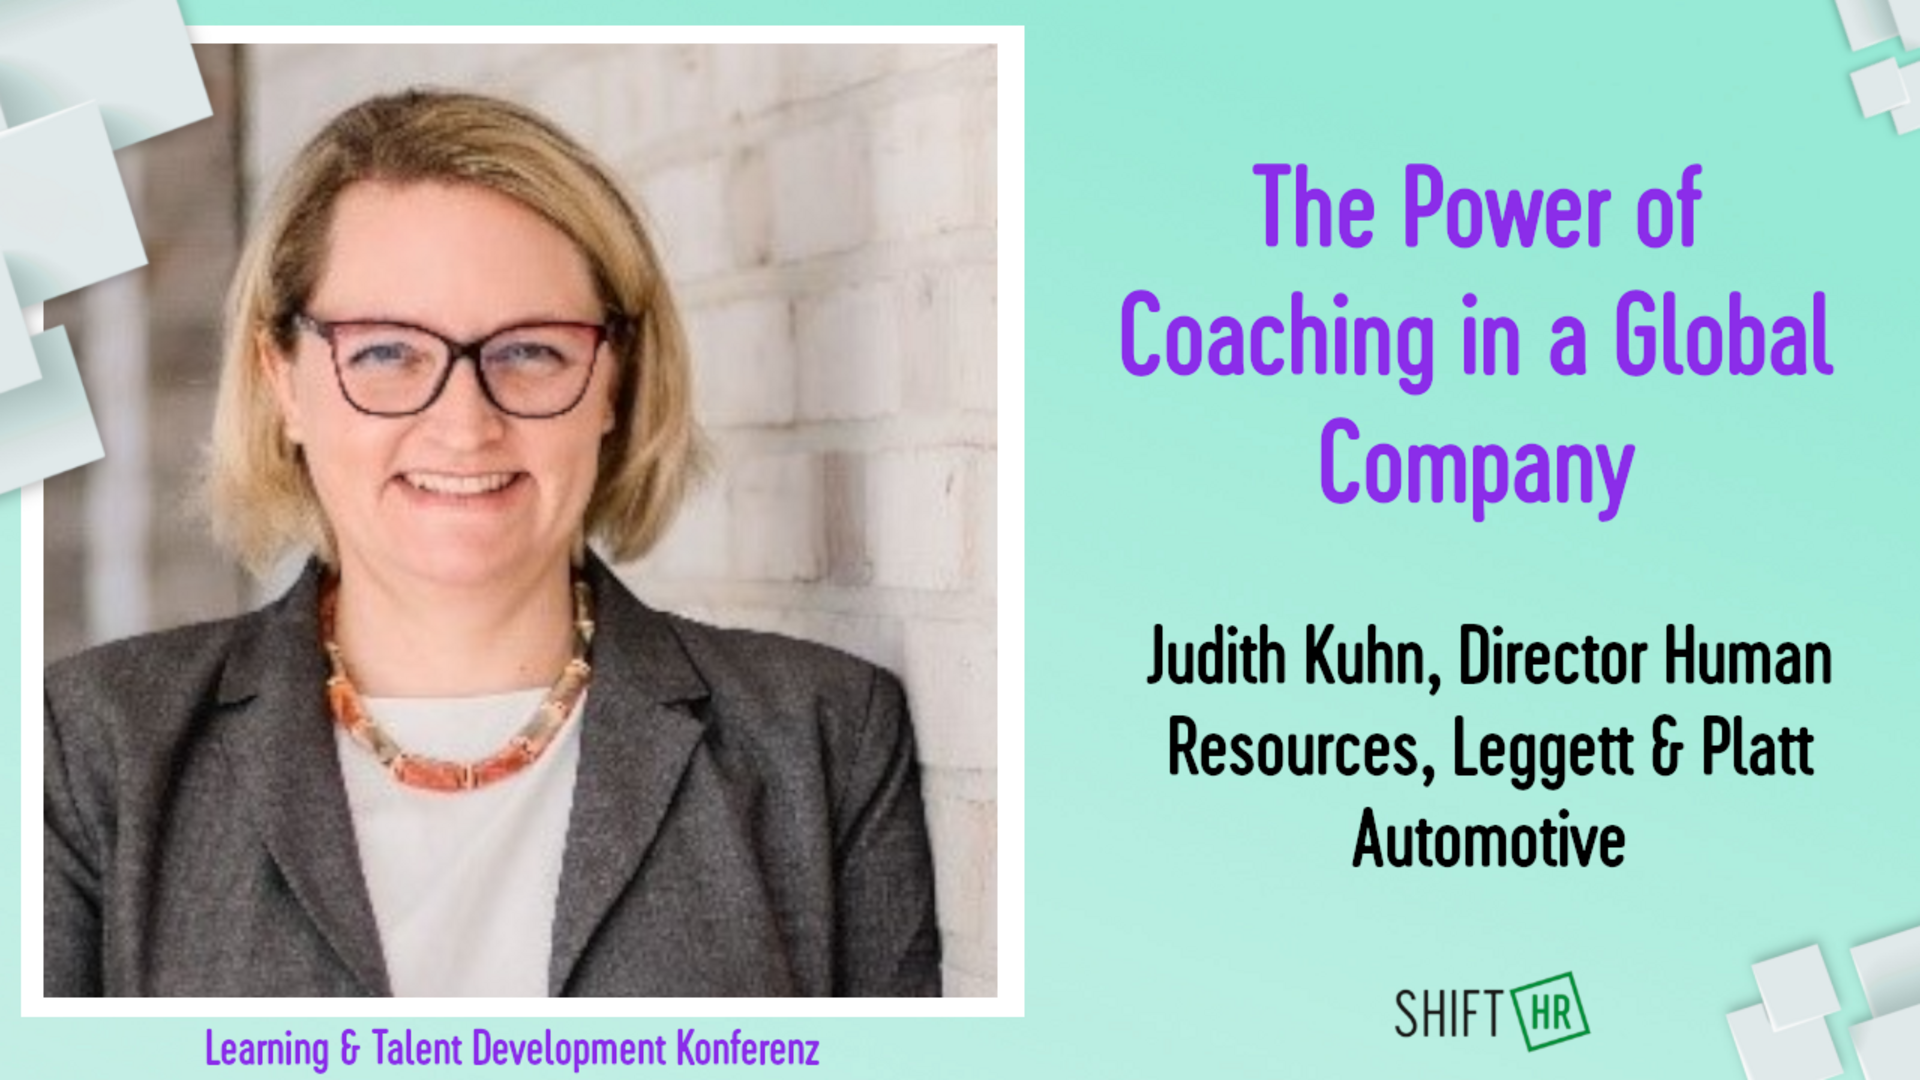 The Power of Coaching  in a Global Company